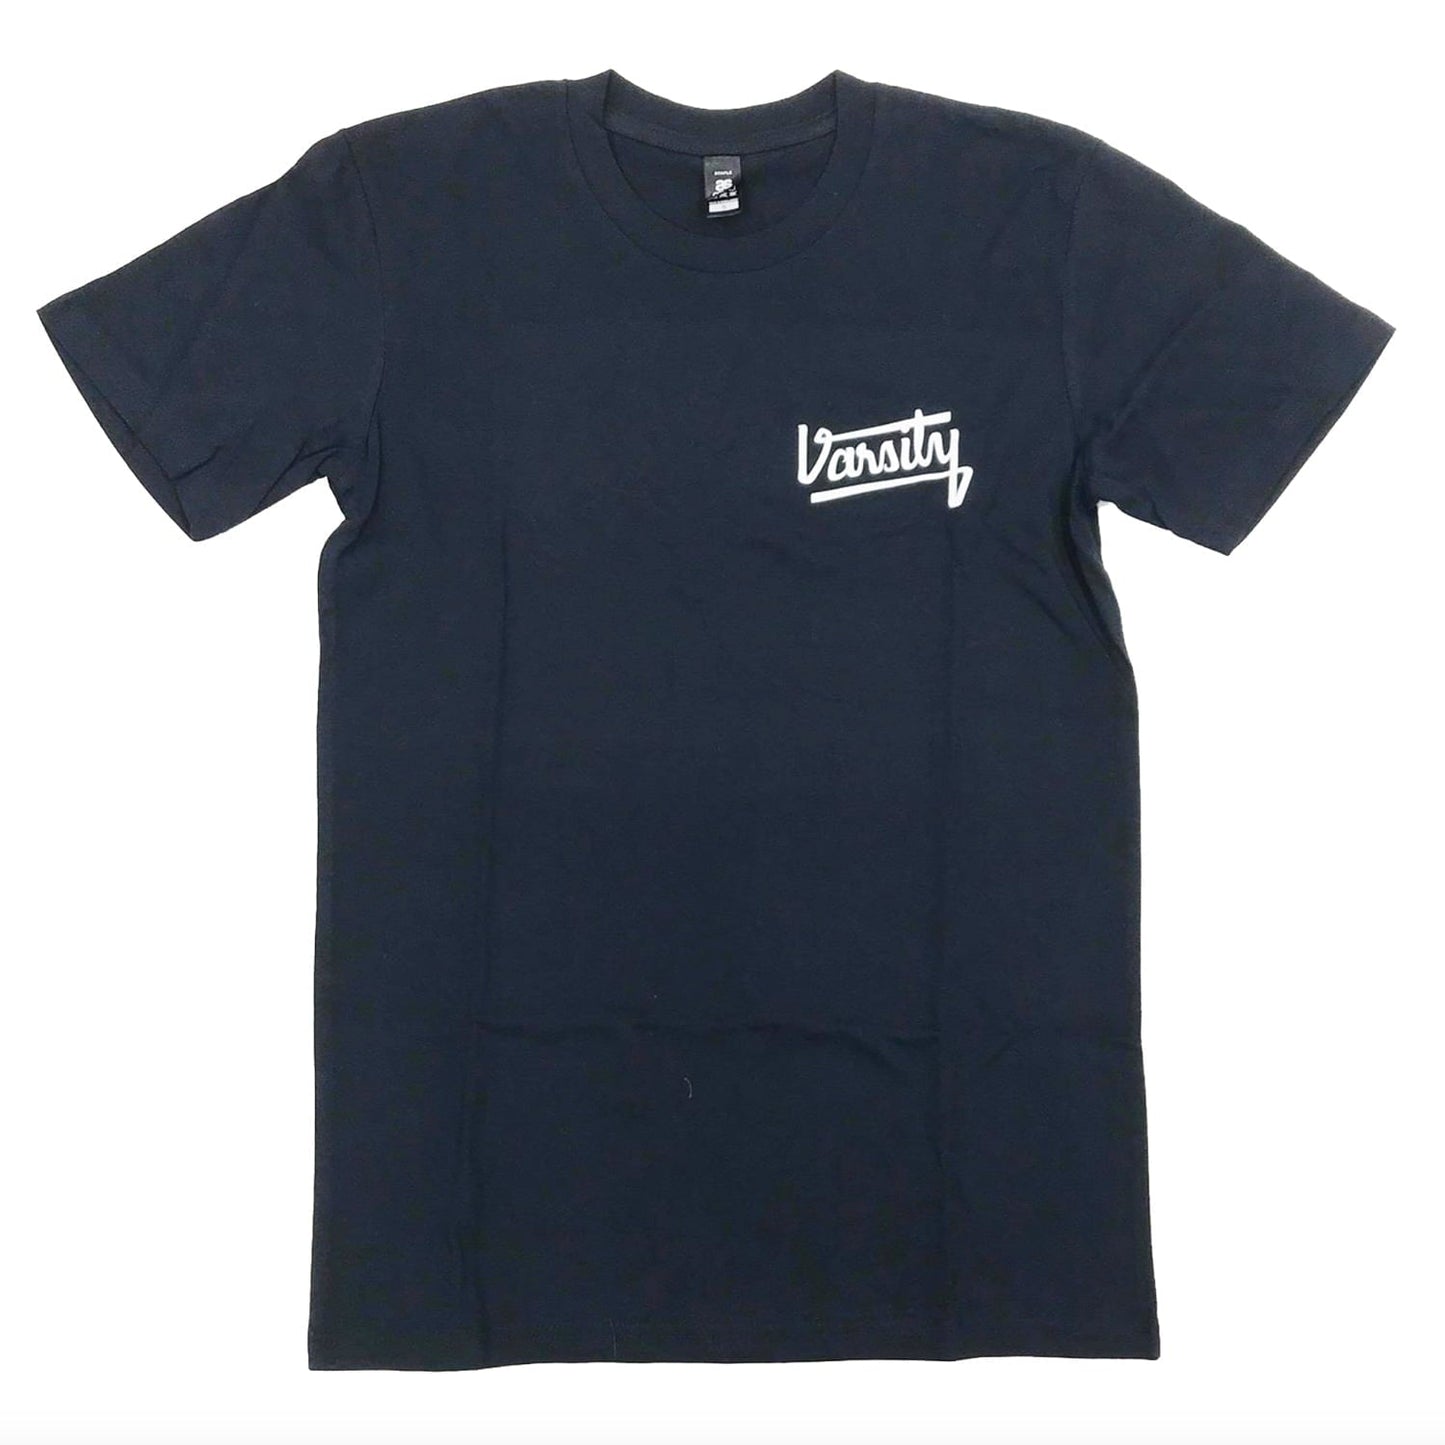 Managers Tee (Unisex)